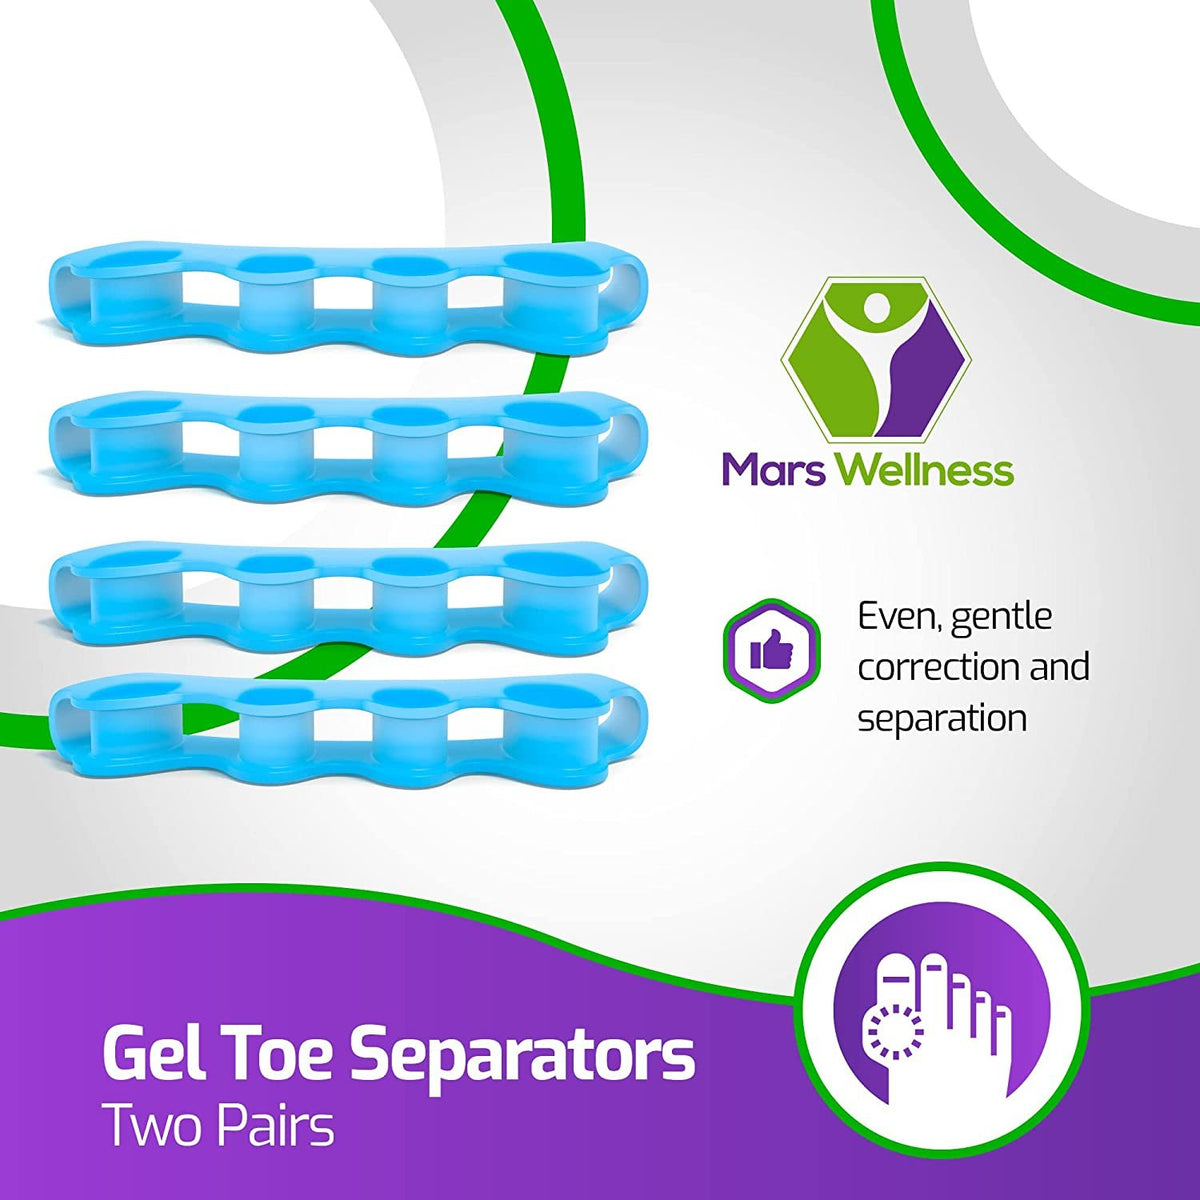 Mars Wellness Gel Toe Separators - Universal Toe Spreaders Straighteners to Relieve Foot Pain, Fix Overlapping Toes & Correct Bunions - Toe Spacers are Comfortable to Wear with Shoes - 2 Pairs